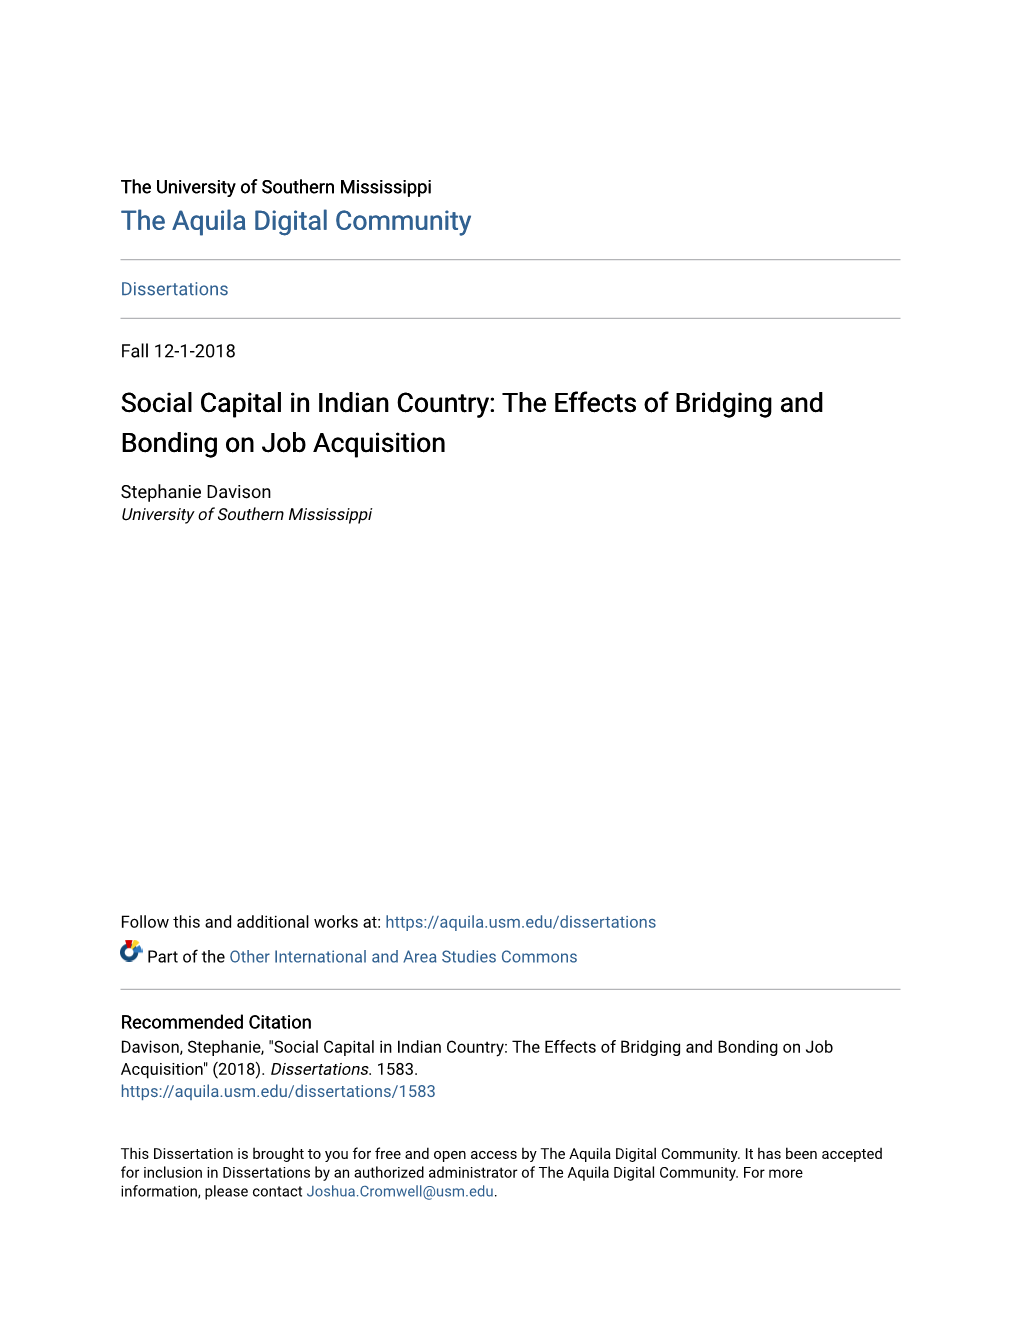 Social Capital in Indian Country: the Effects of Bridging and Bonding on Job Acquisition